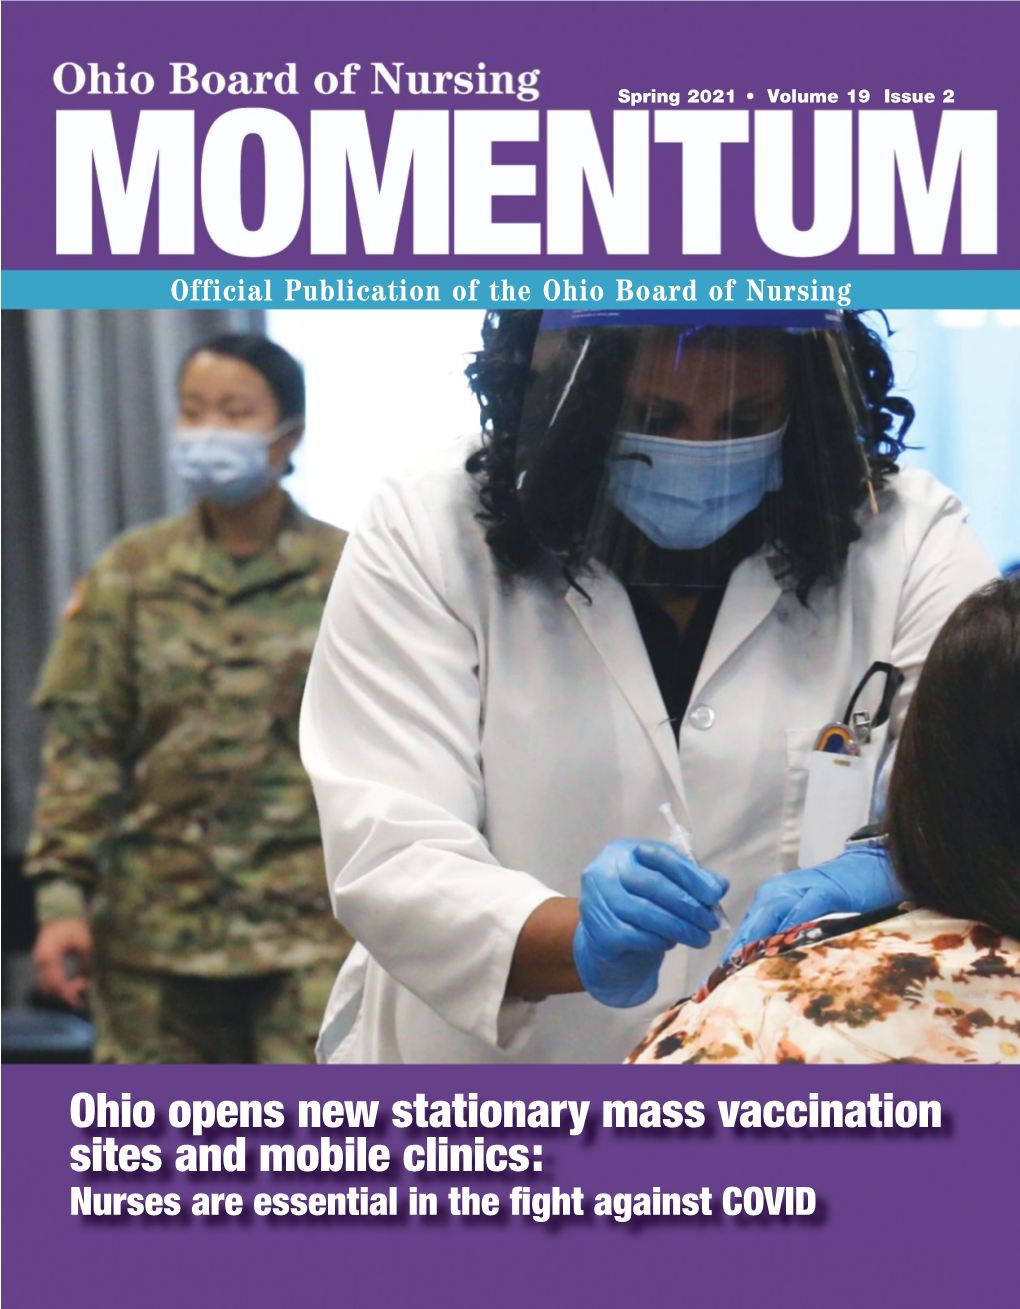 Ohio Opens New Stationary Mass Vaccination Sites and Mobile Clinics: Nurses Are Essential in the ﬁght Against COVID